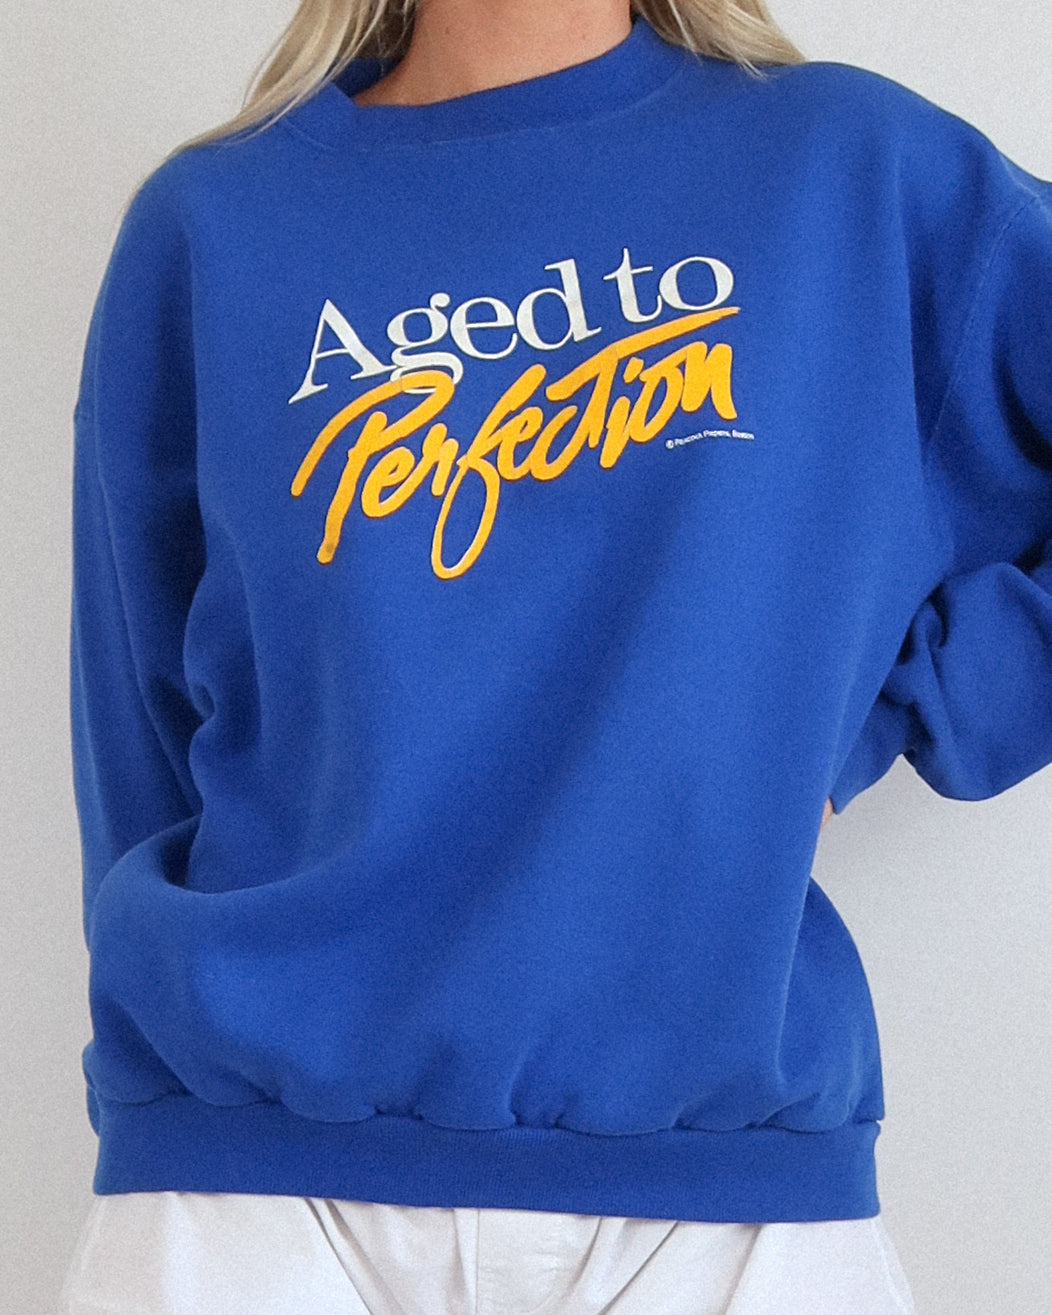 Vintage 'Aged to Perfection' Crew